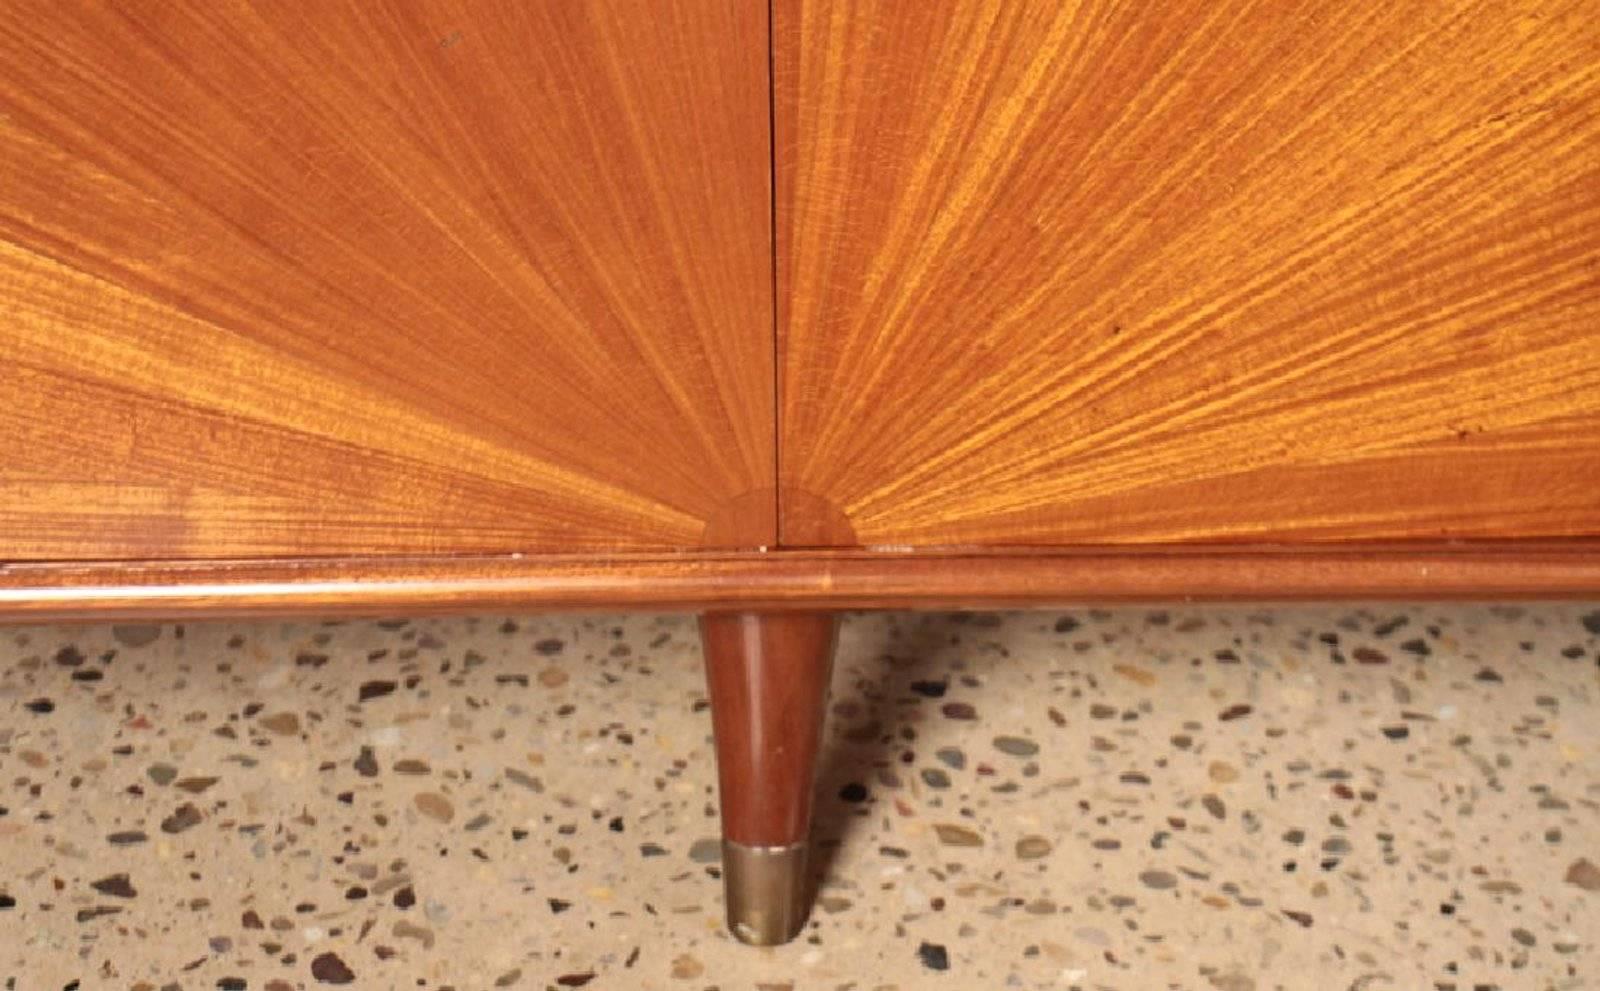 This Mid-Century Modern side board is made of African mahogany, featuring 6 doors with starburst design. The interior features glass shelving and drawers in the center cabinet. Gorgeous piece.